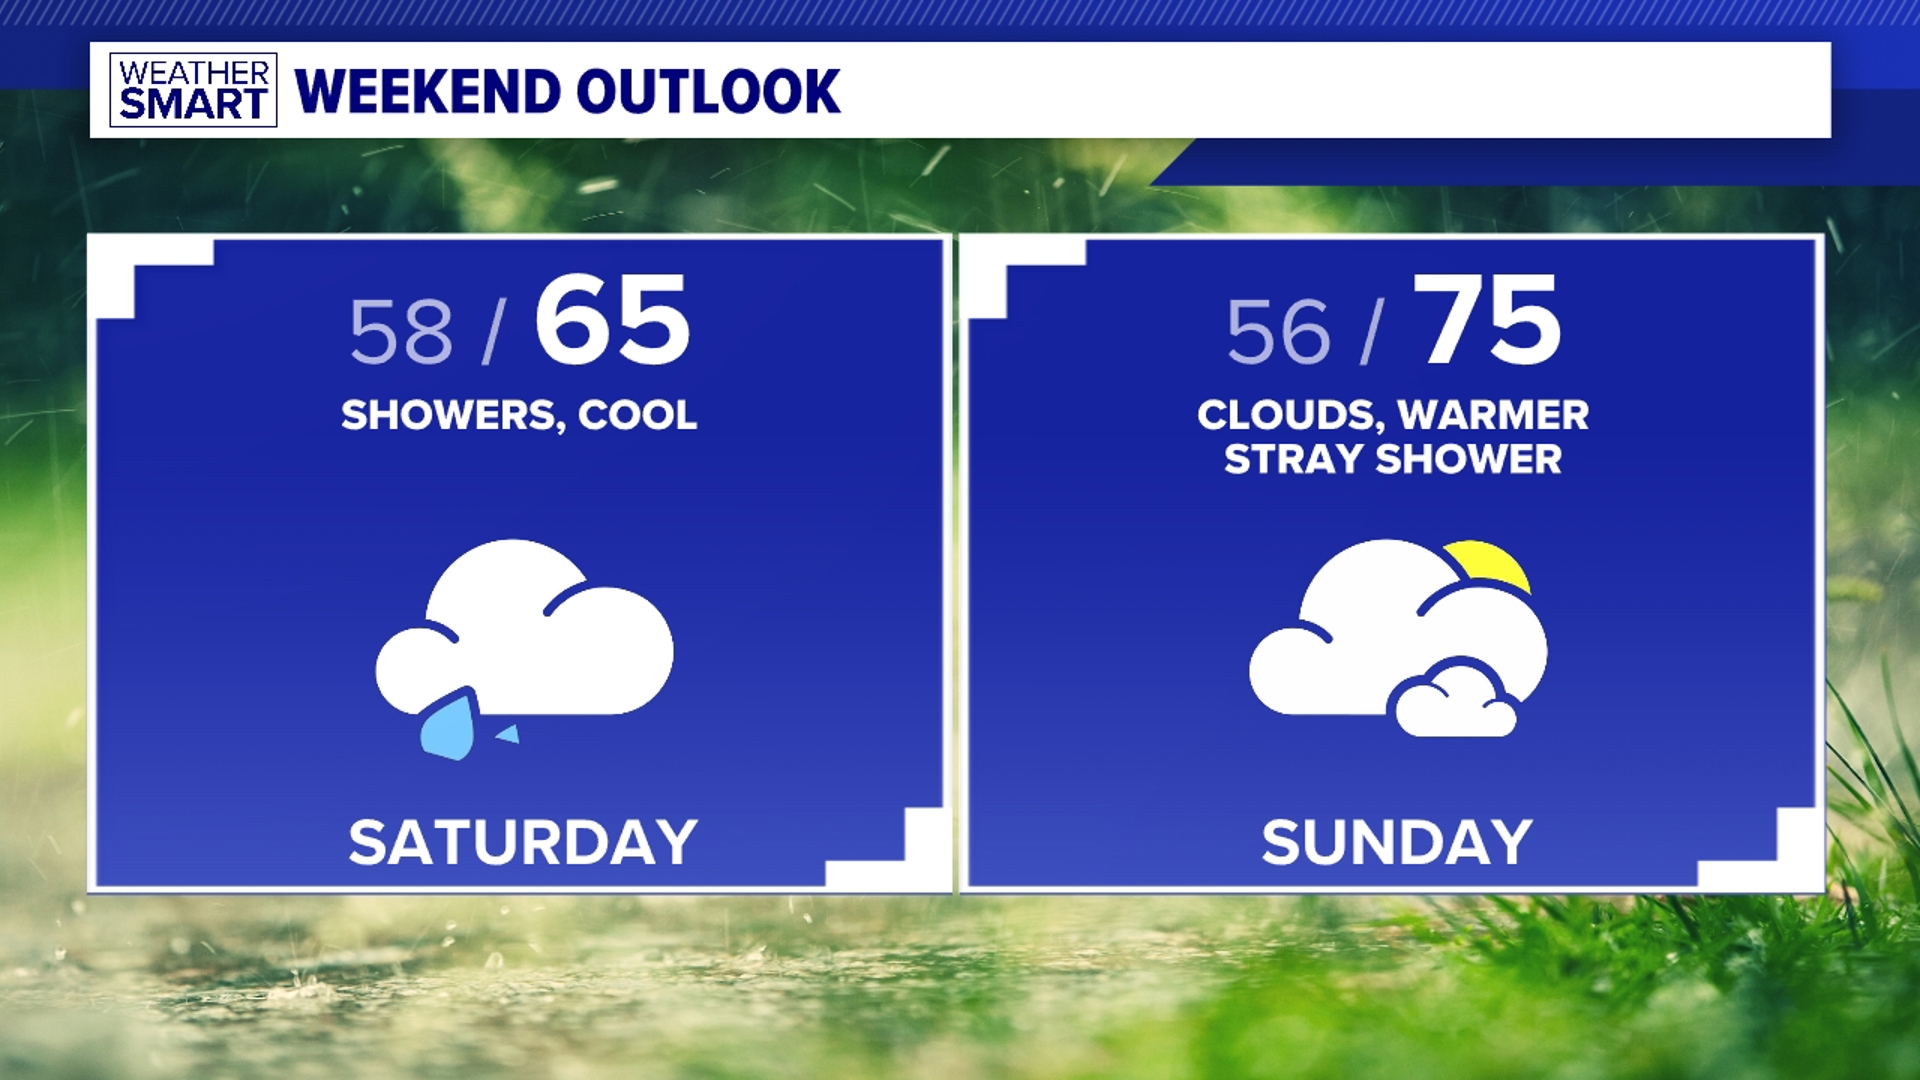 Rain to start the weekend but it's not a total wash!